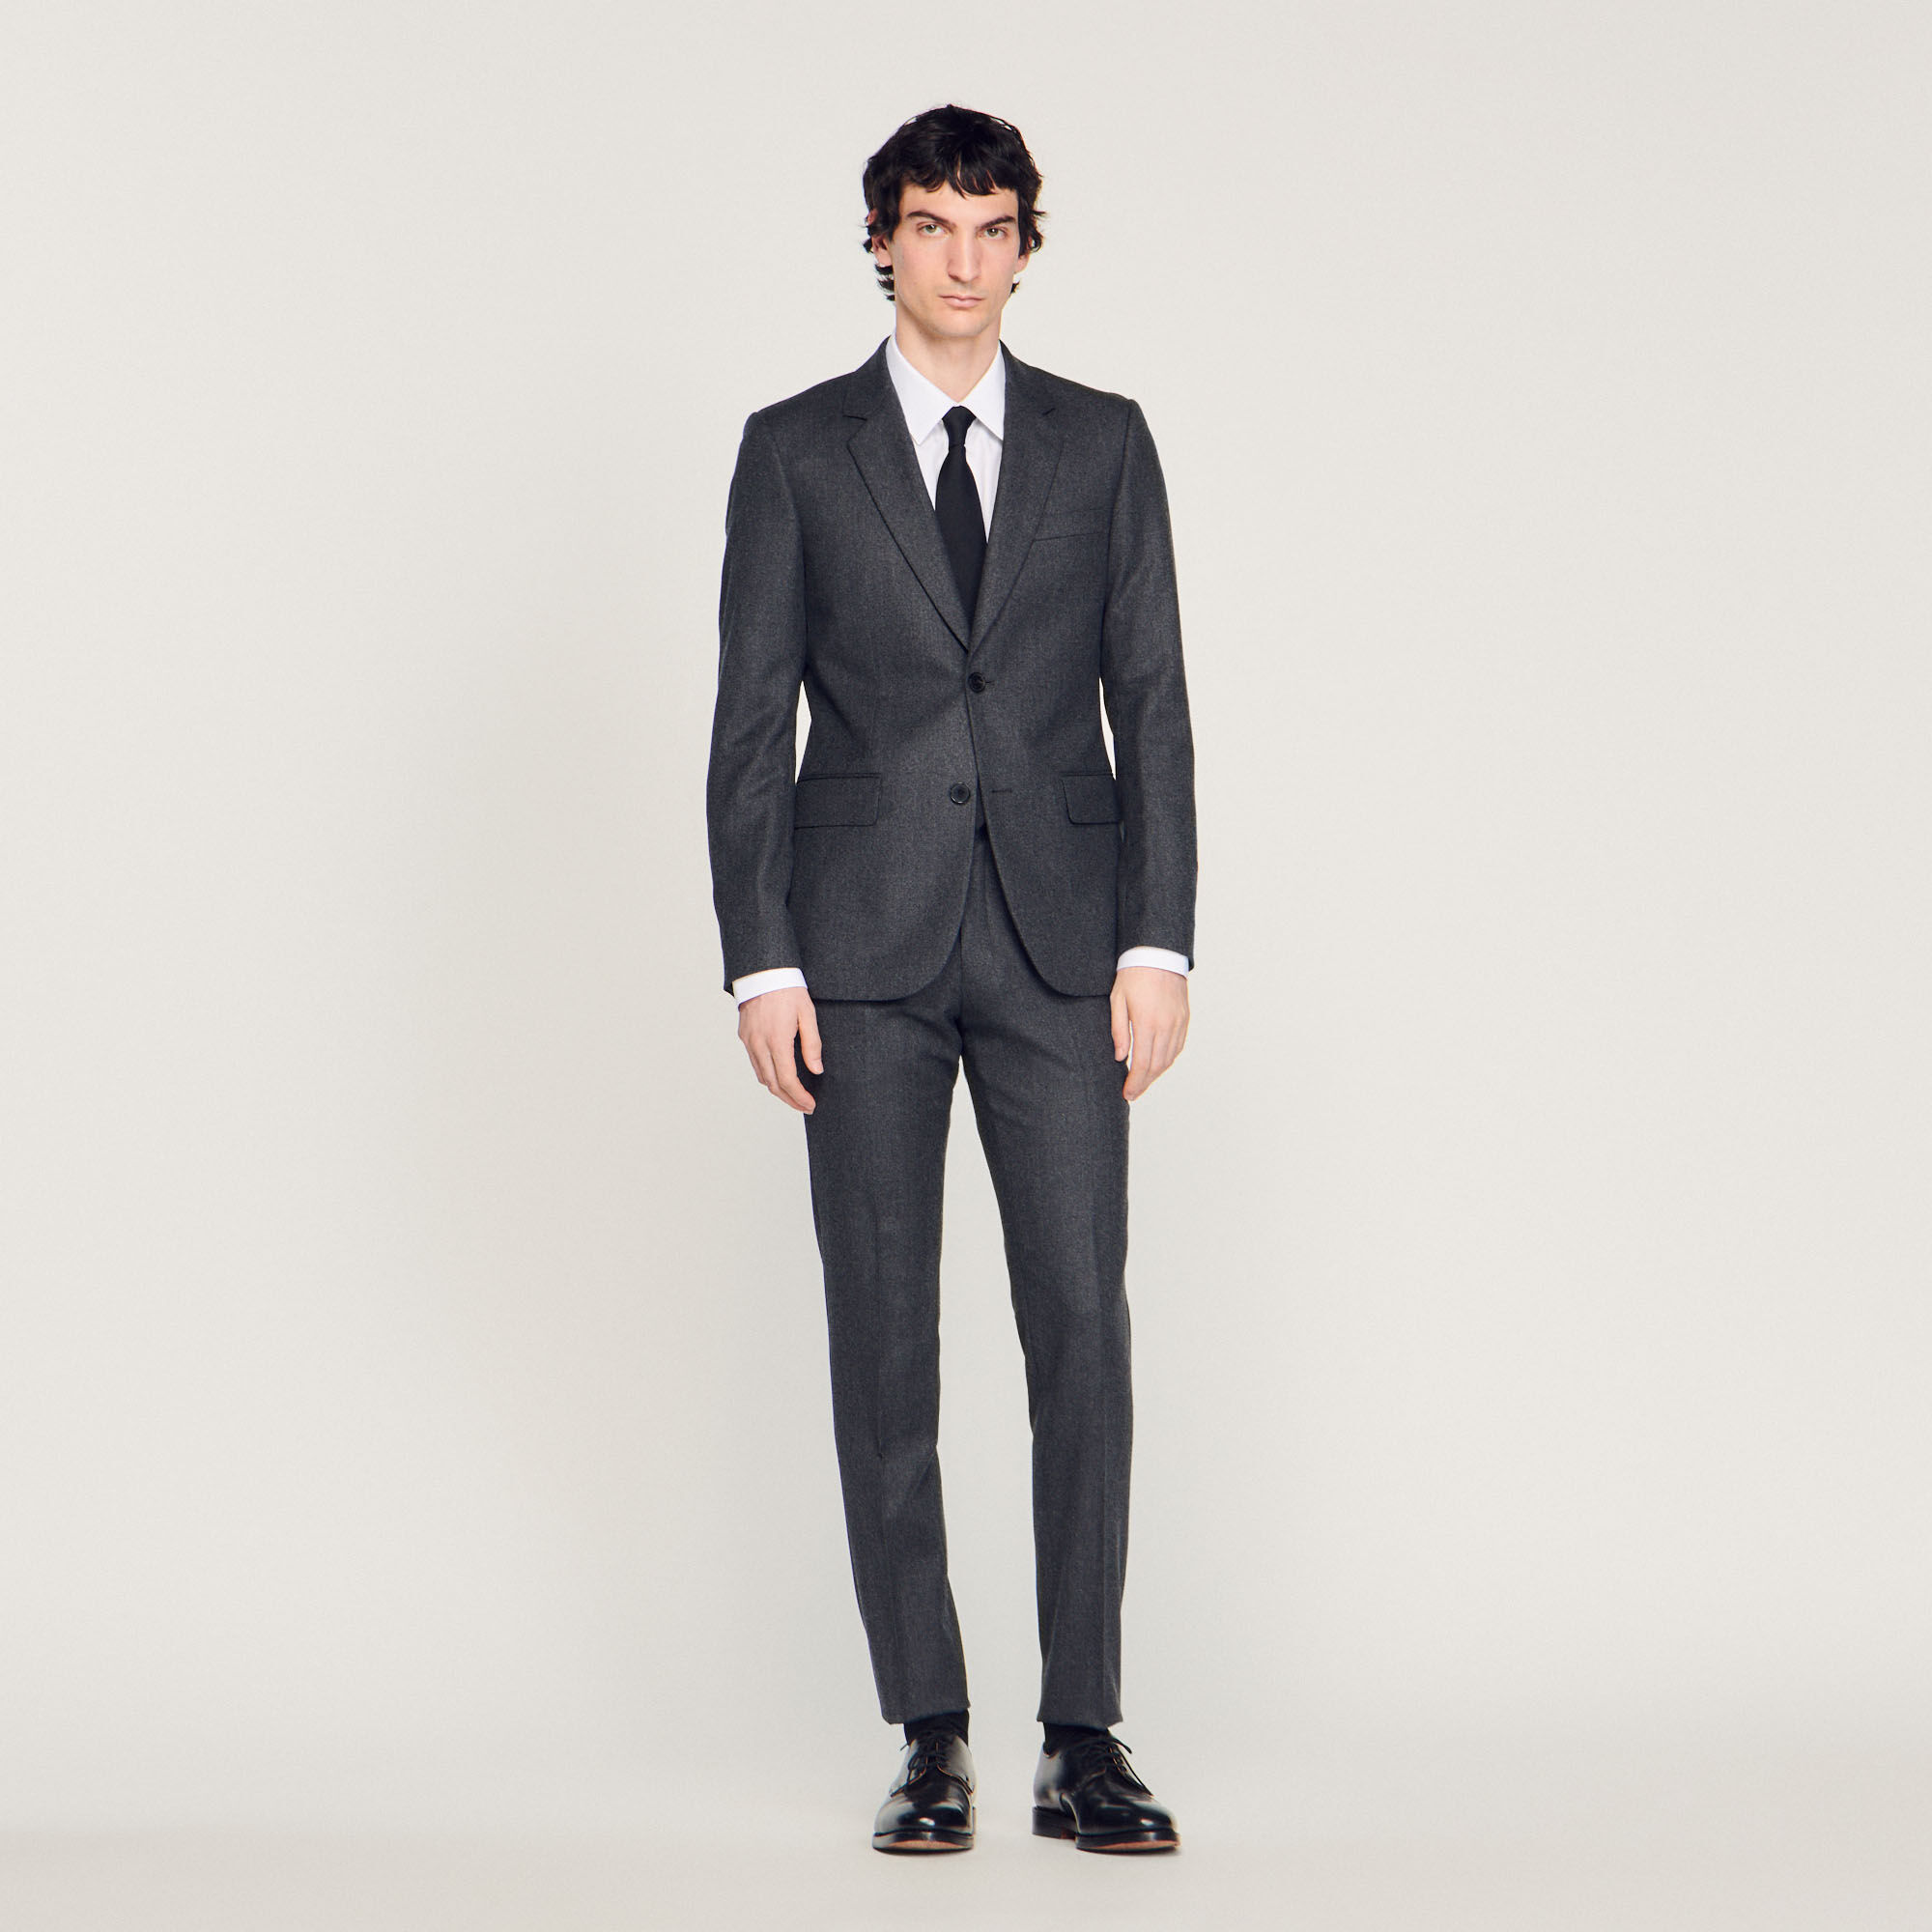 Men's Jackets and Blazers - New Collection | Sandro